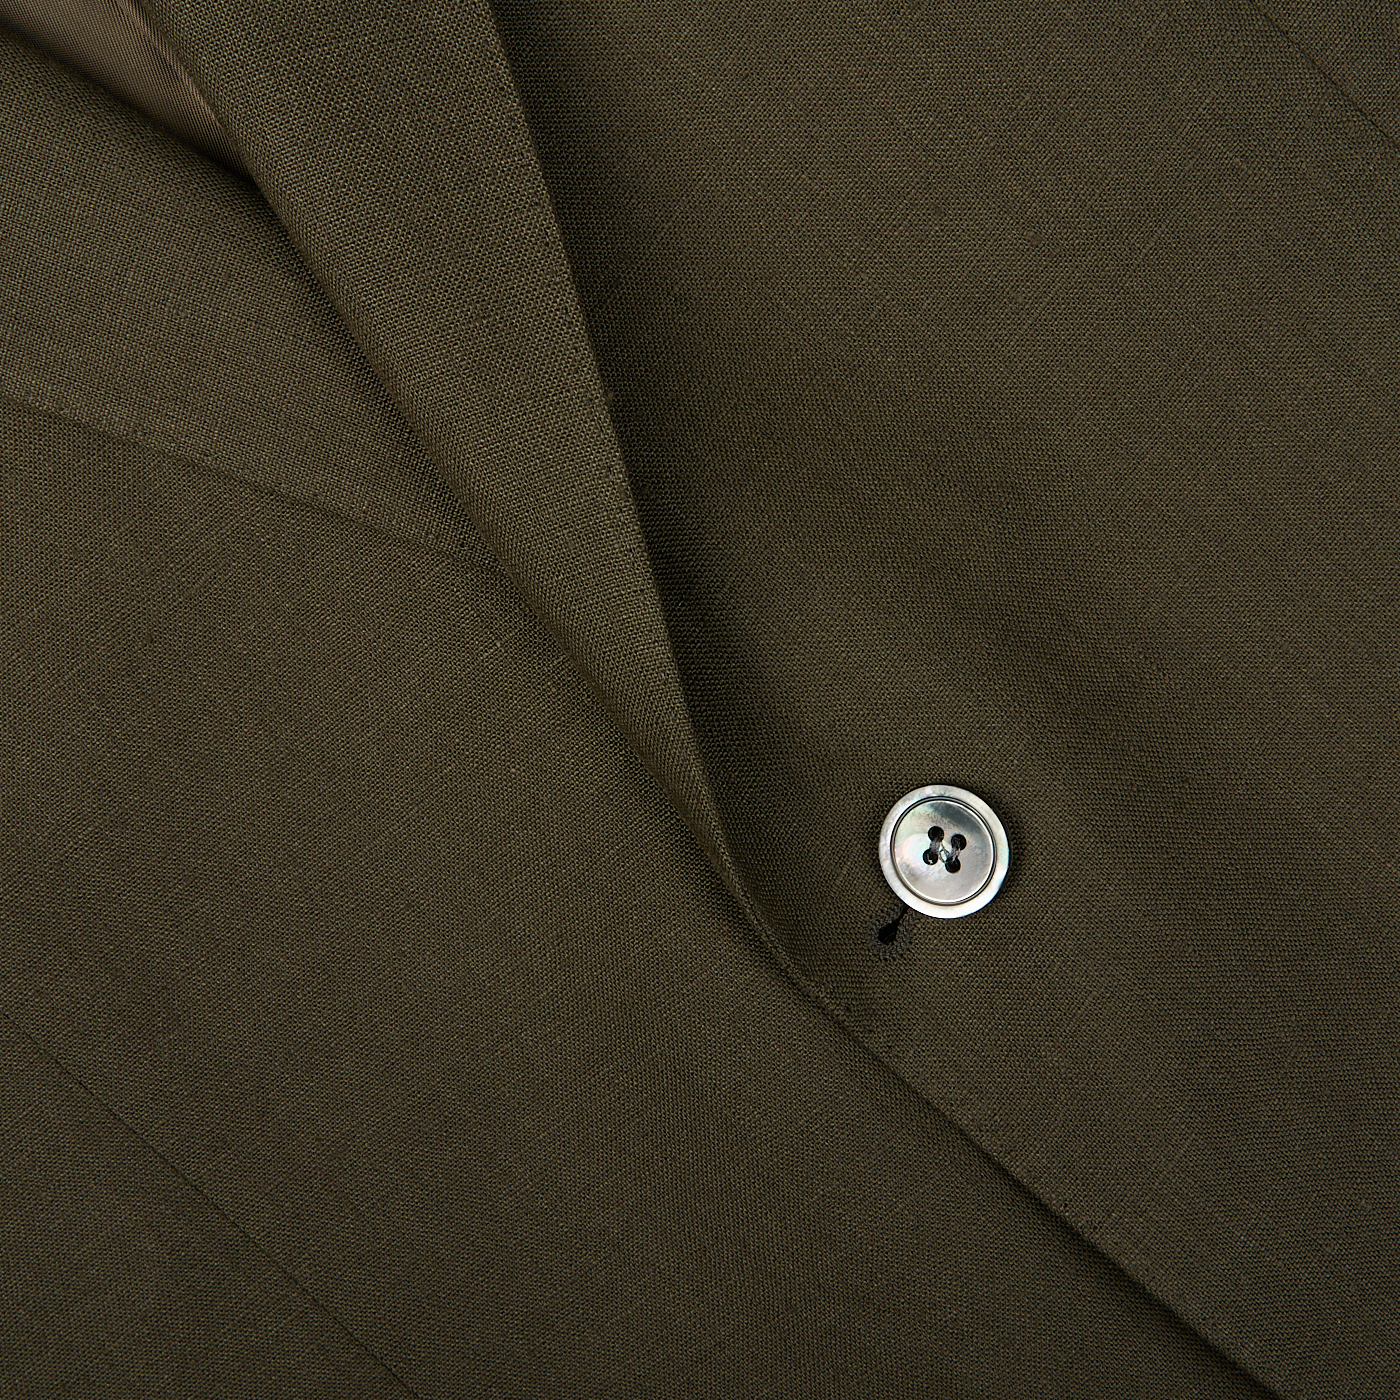 Close-up of a Green Leaf Pure Linen Suit fabric with a button, likely part of an Oscar Jacobson suit jacket, Fogerty model.